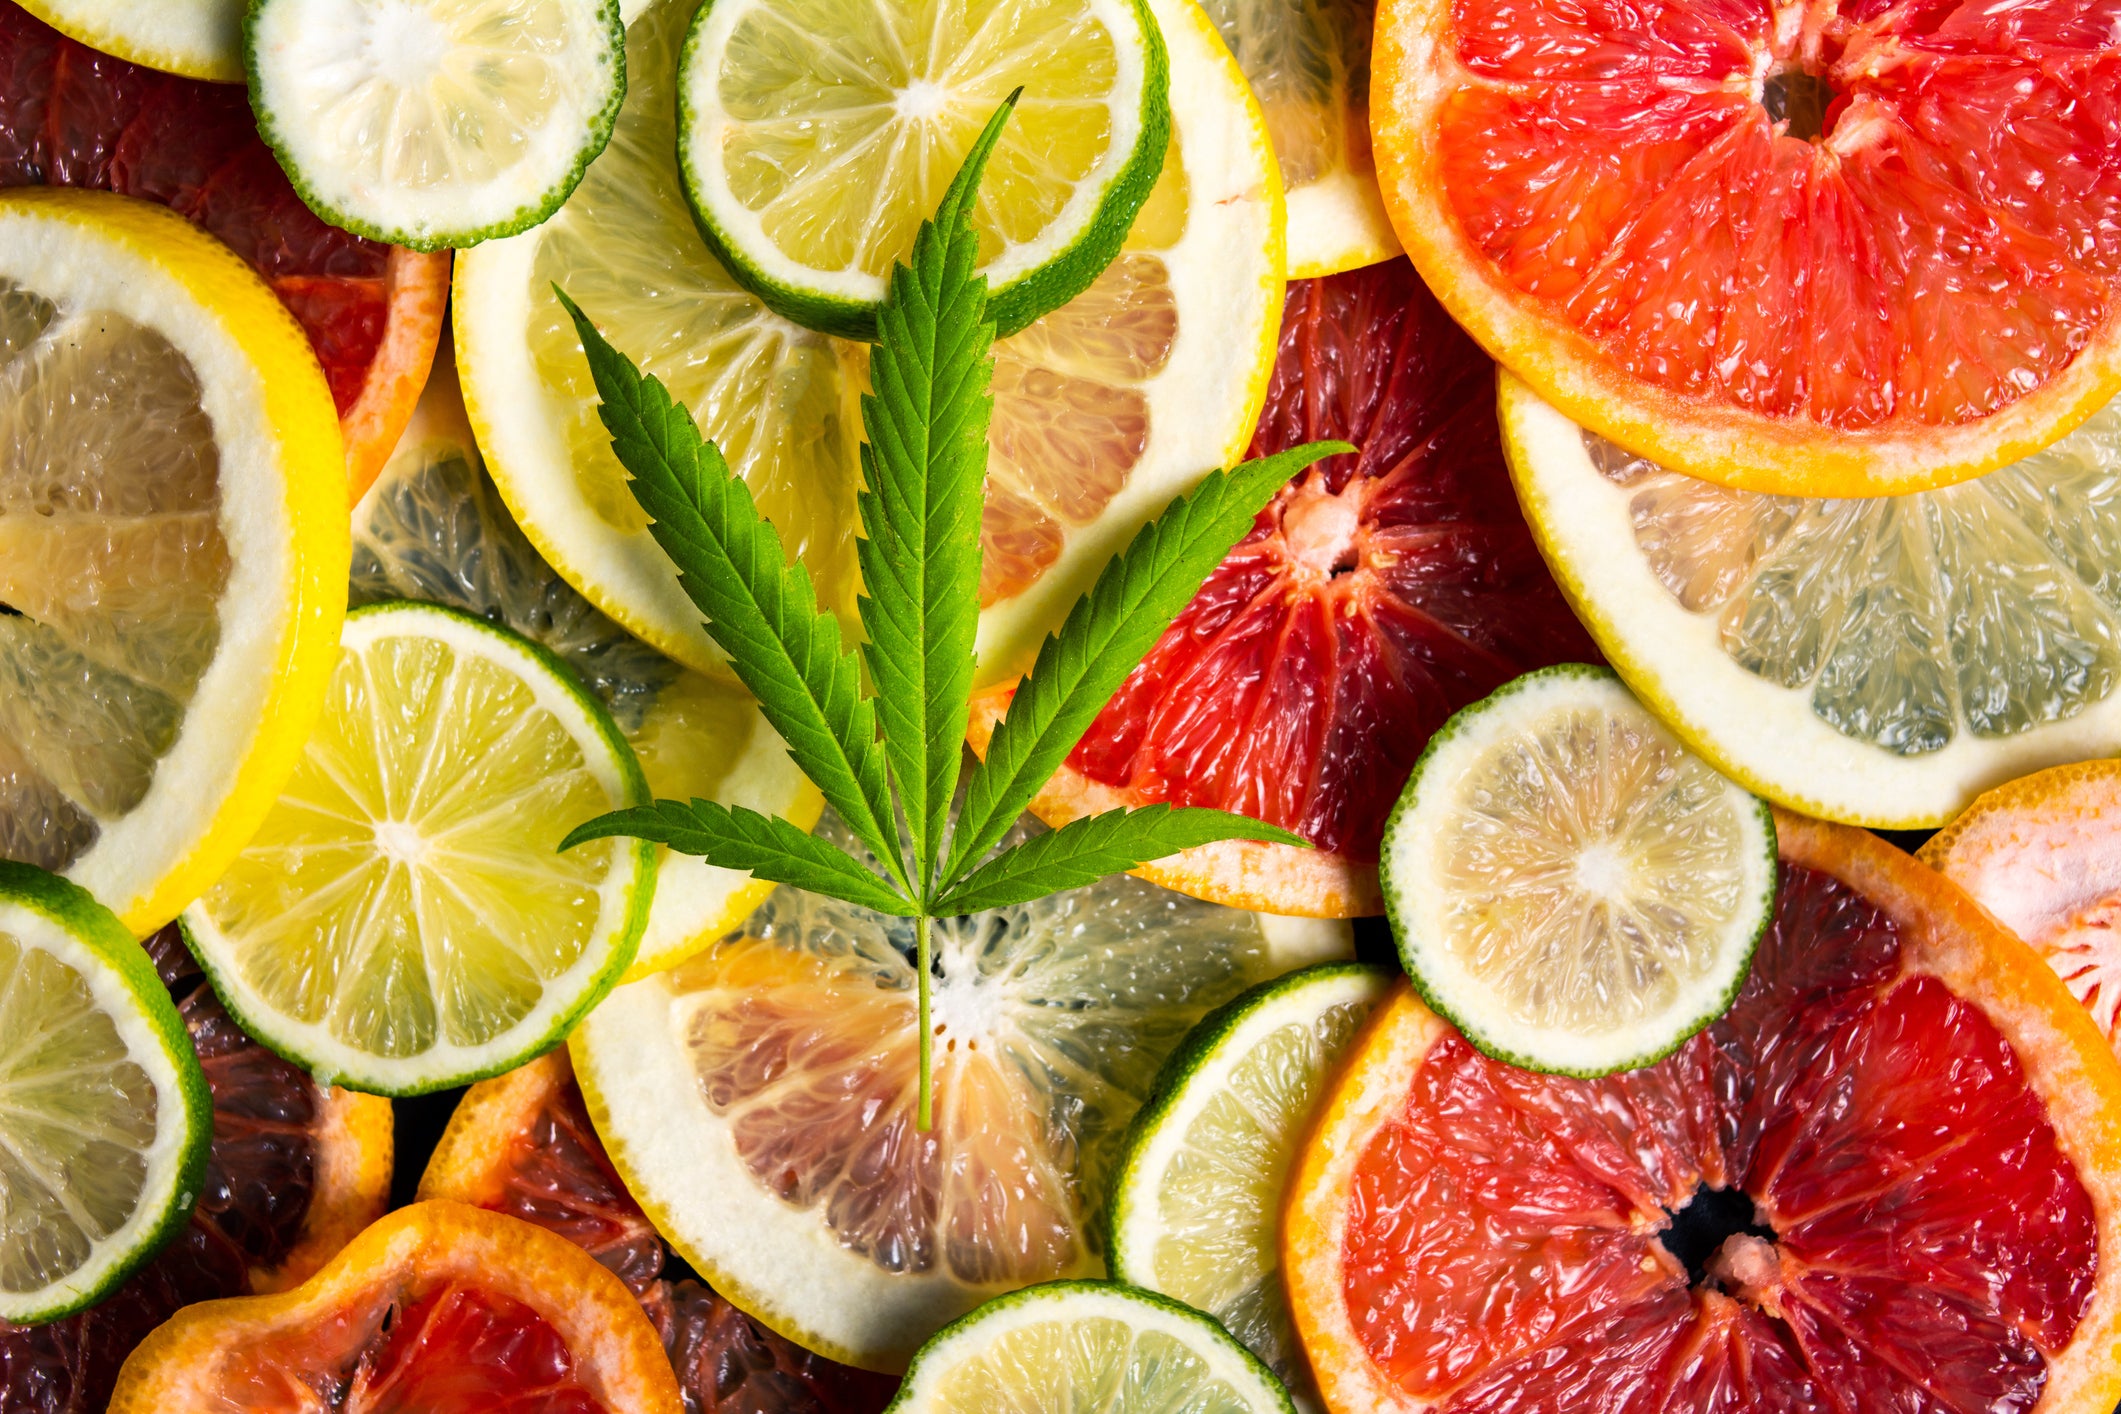 Cannabis flower sits on a variety of colorful citrus fruits which also contain the terpene limonene.